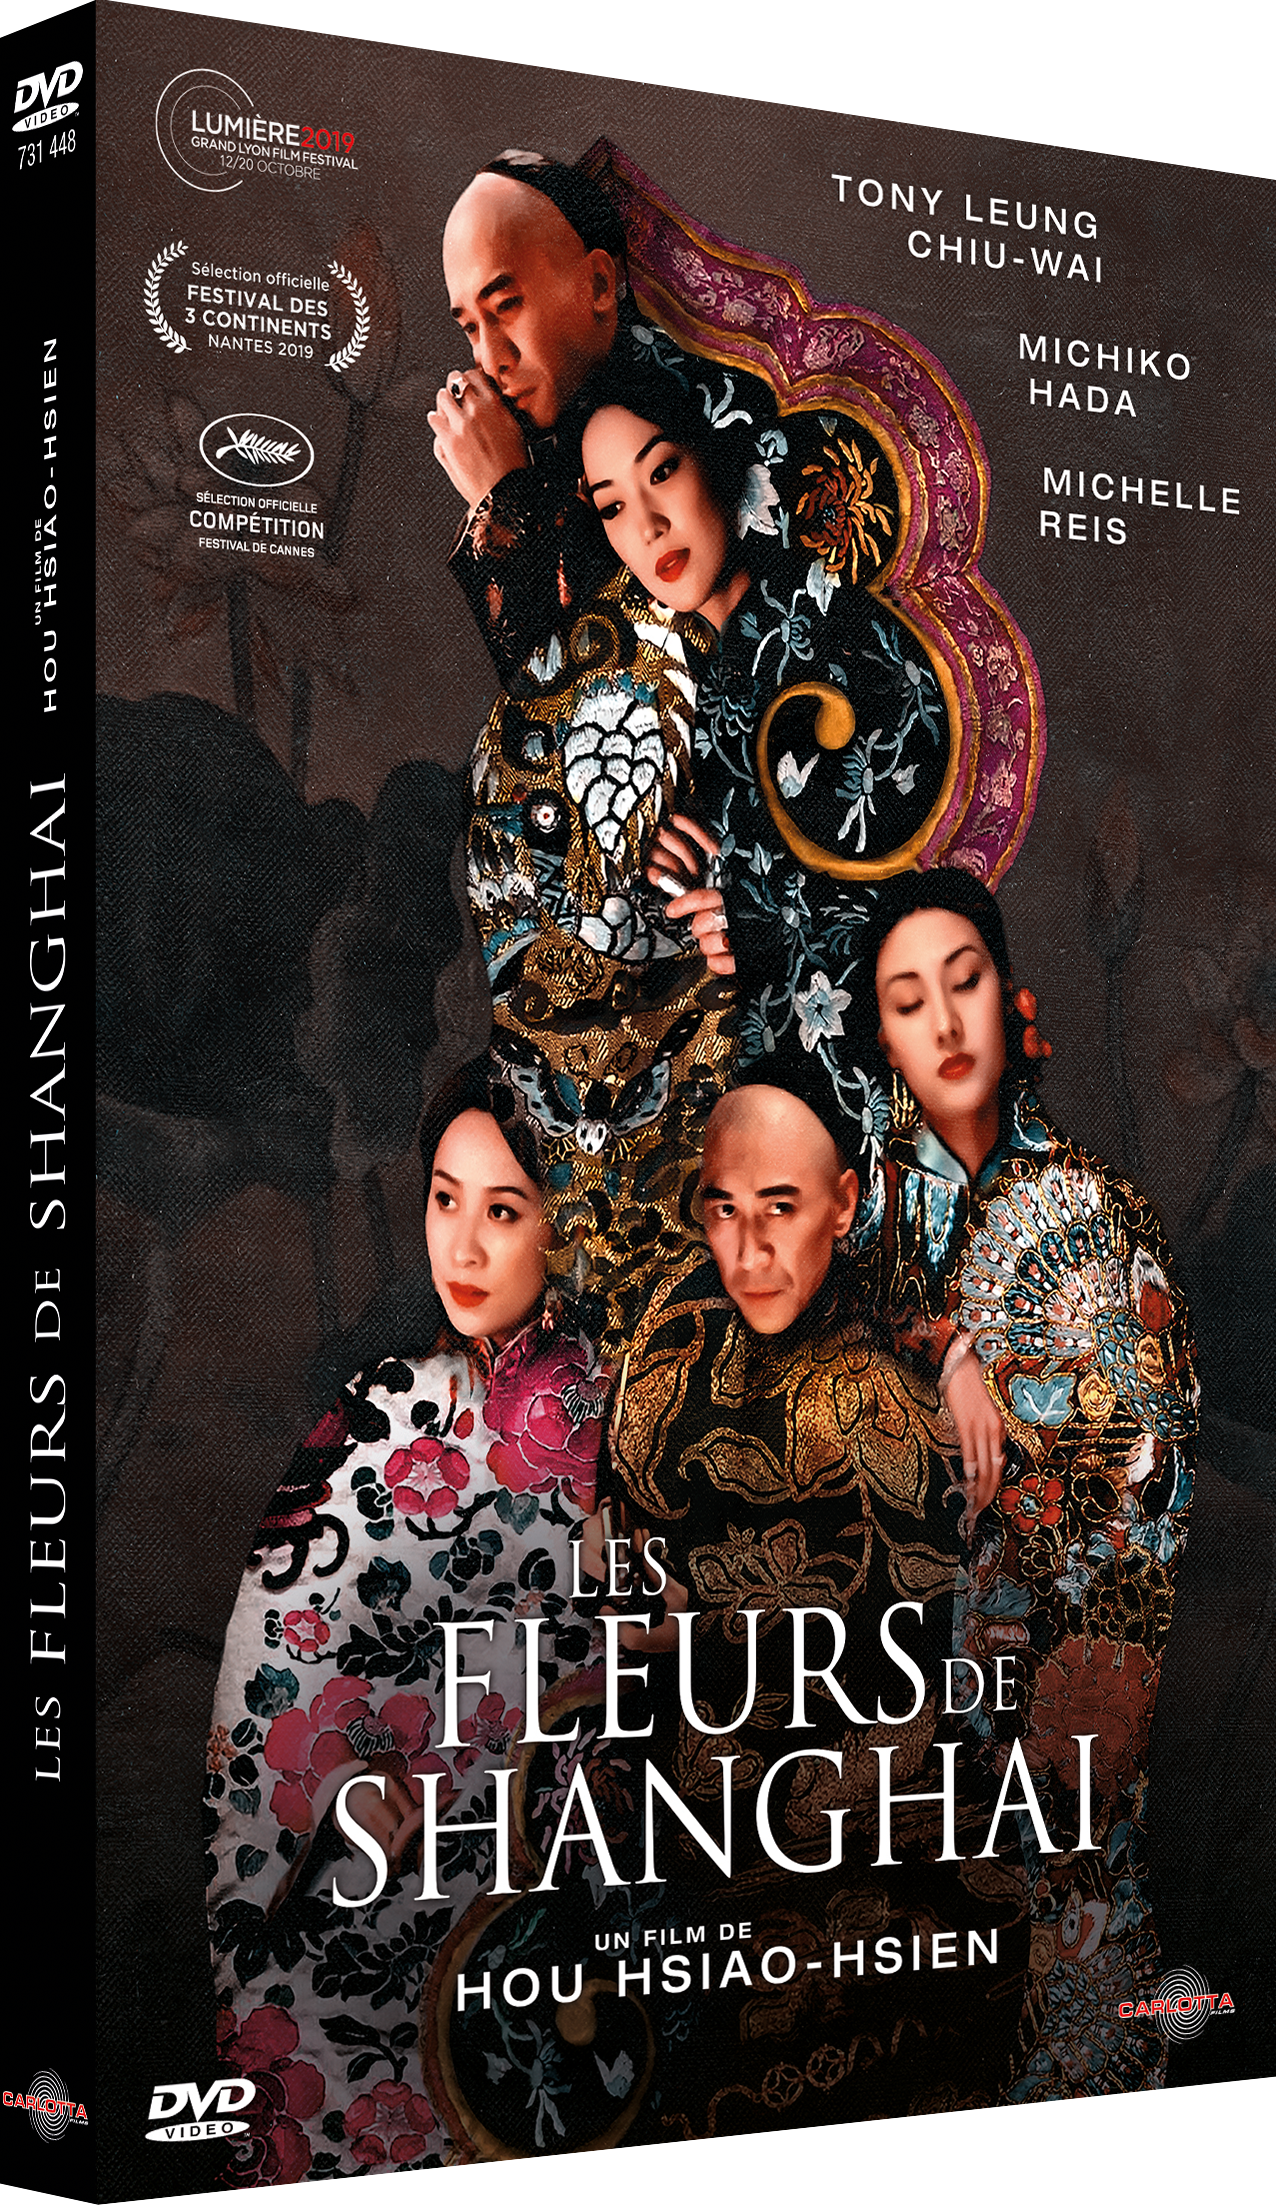 The Flowers of Shanghai by Hou Hsiao-hsien